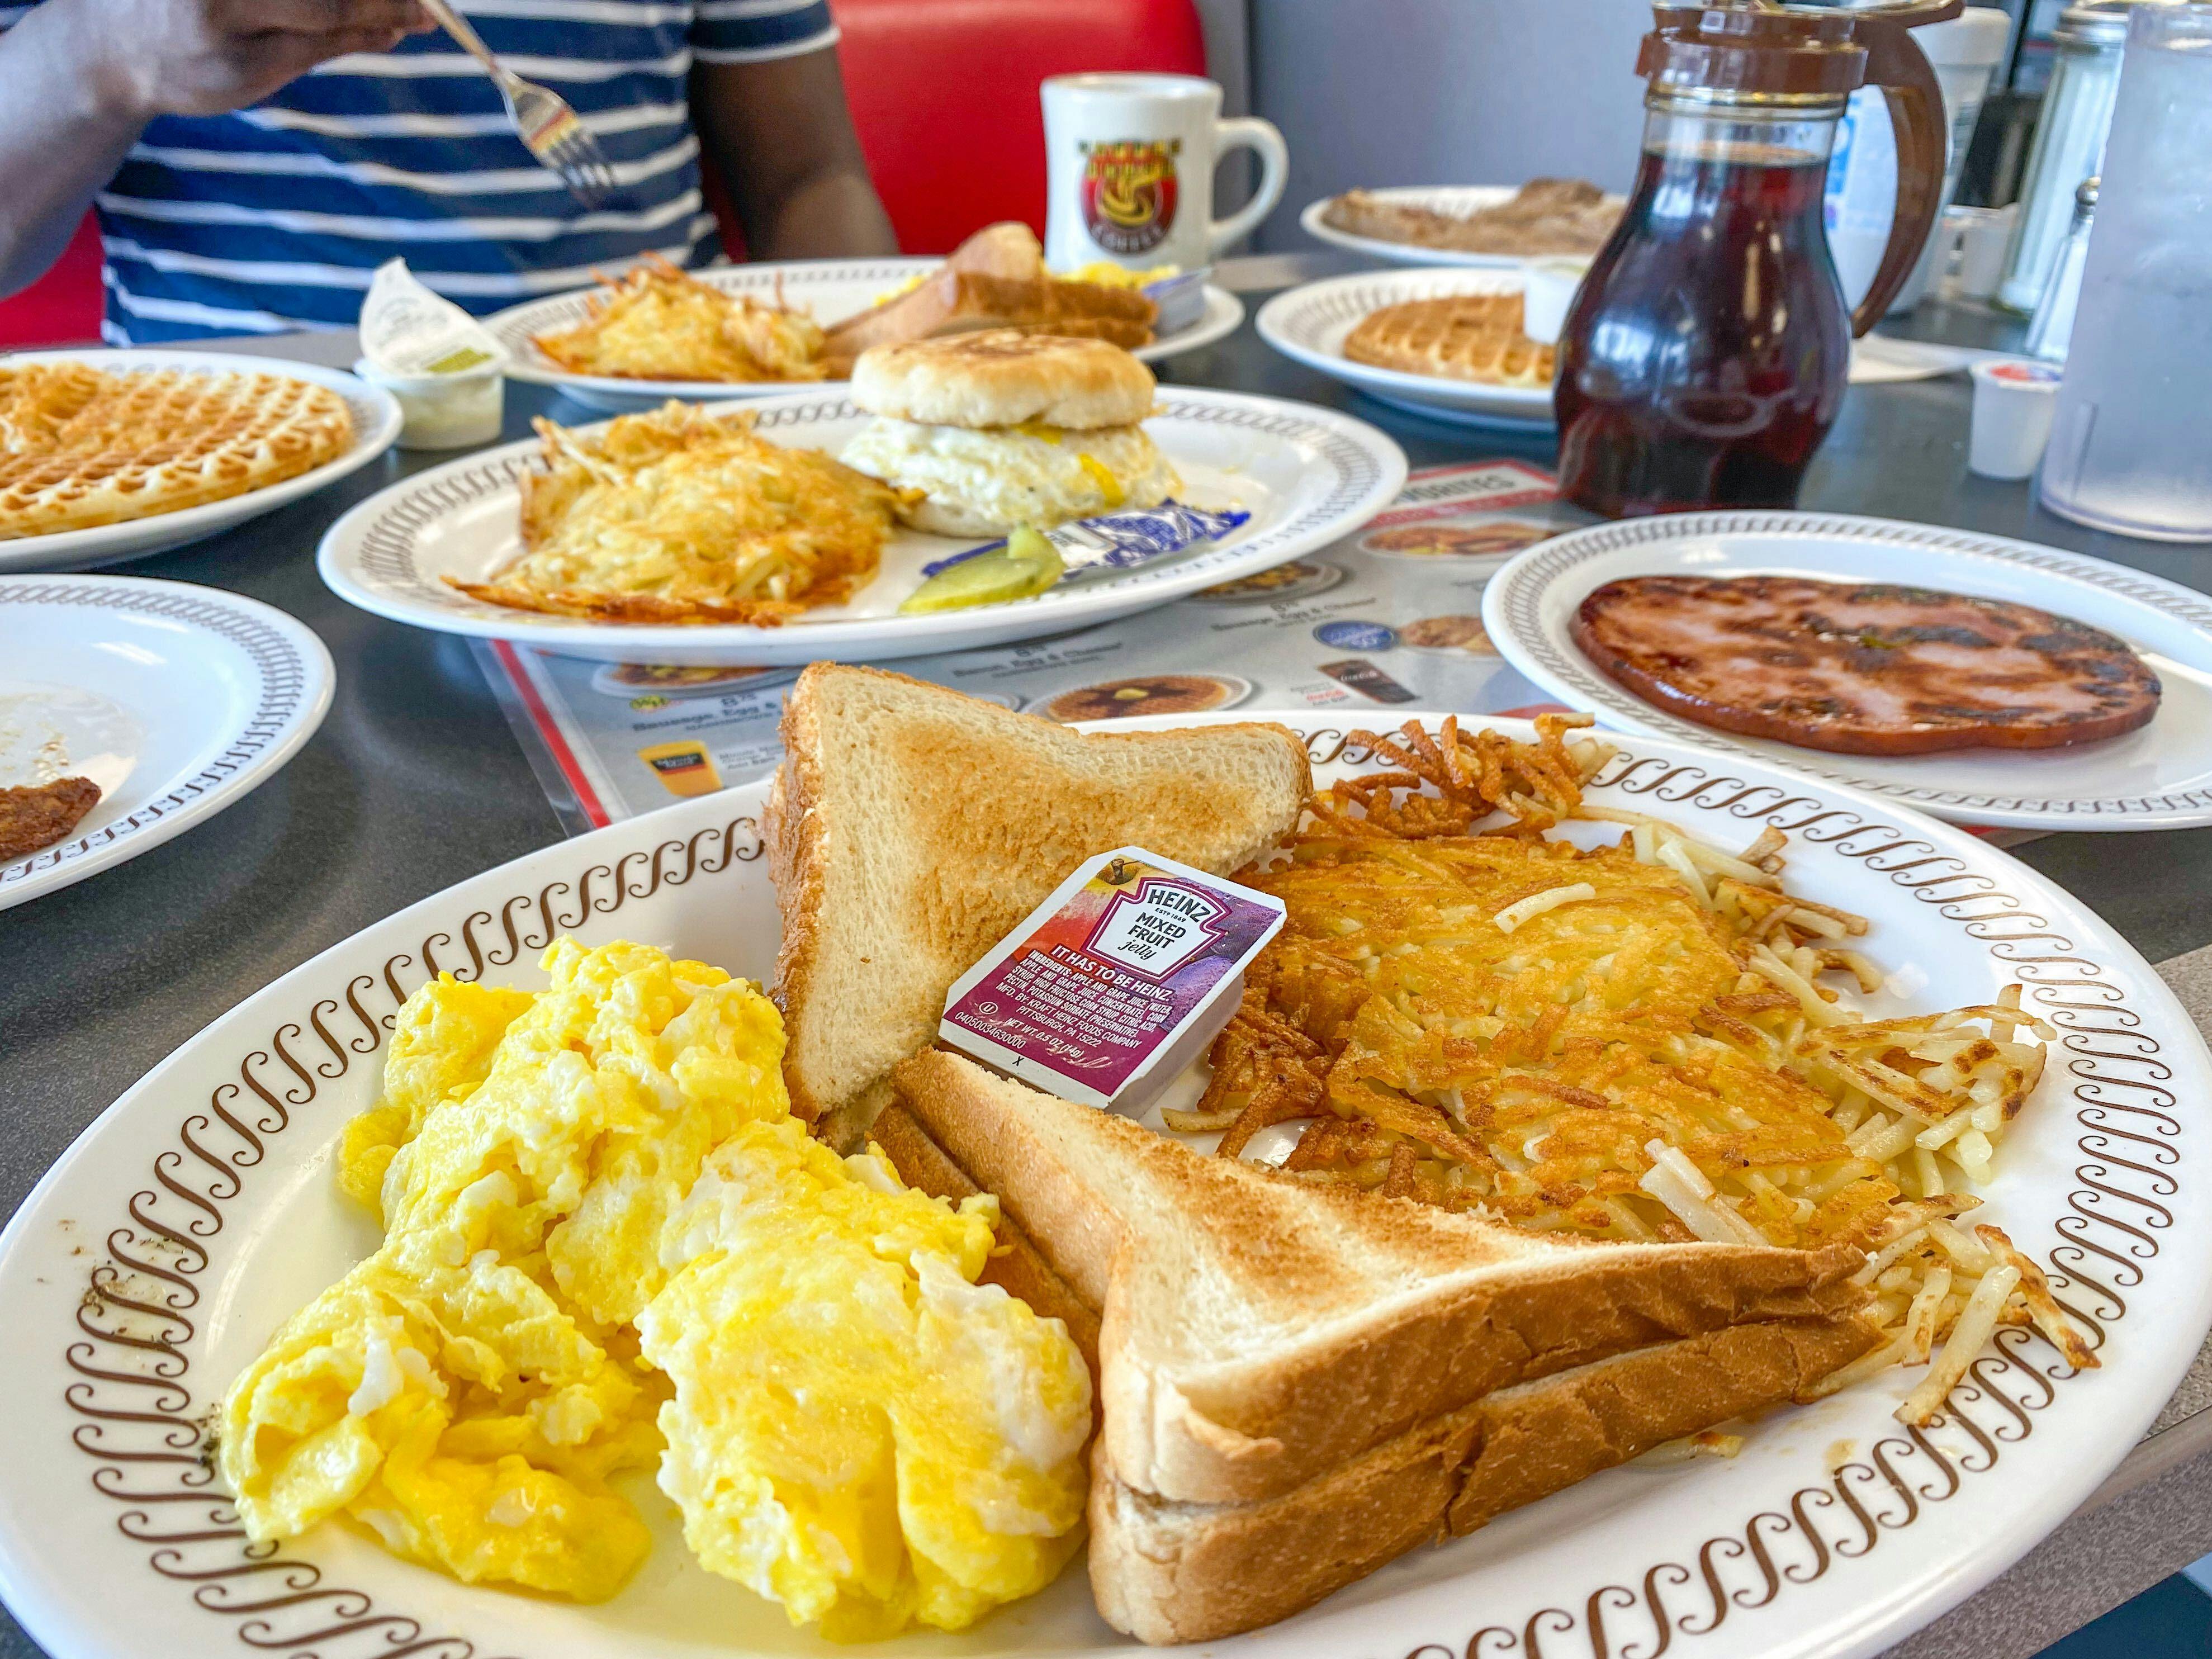 A table at Waffle House covered with plates of breakfast food, a syrup container, and drinks.